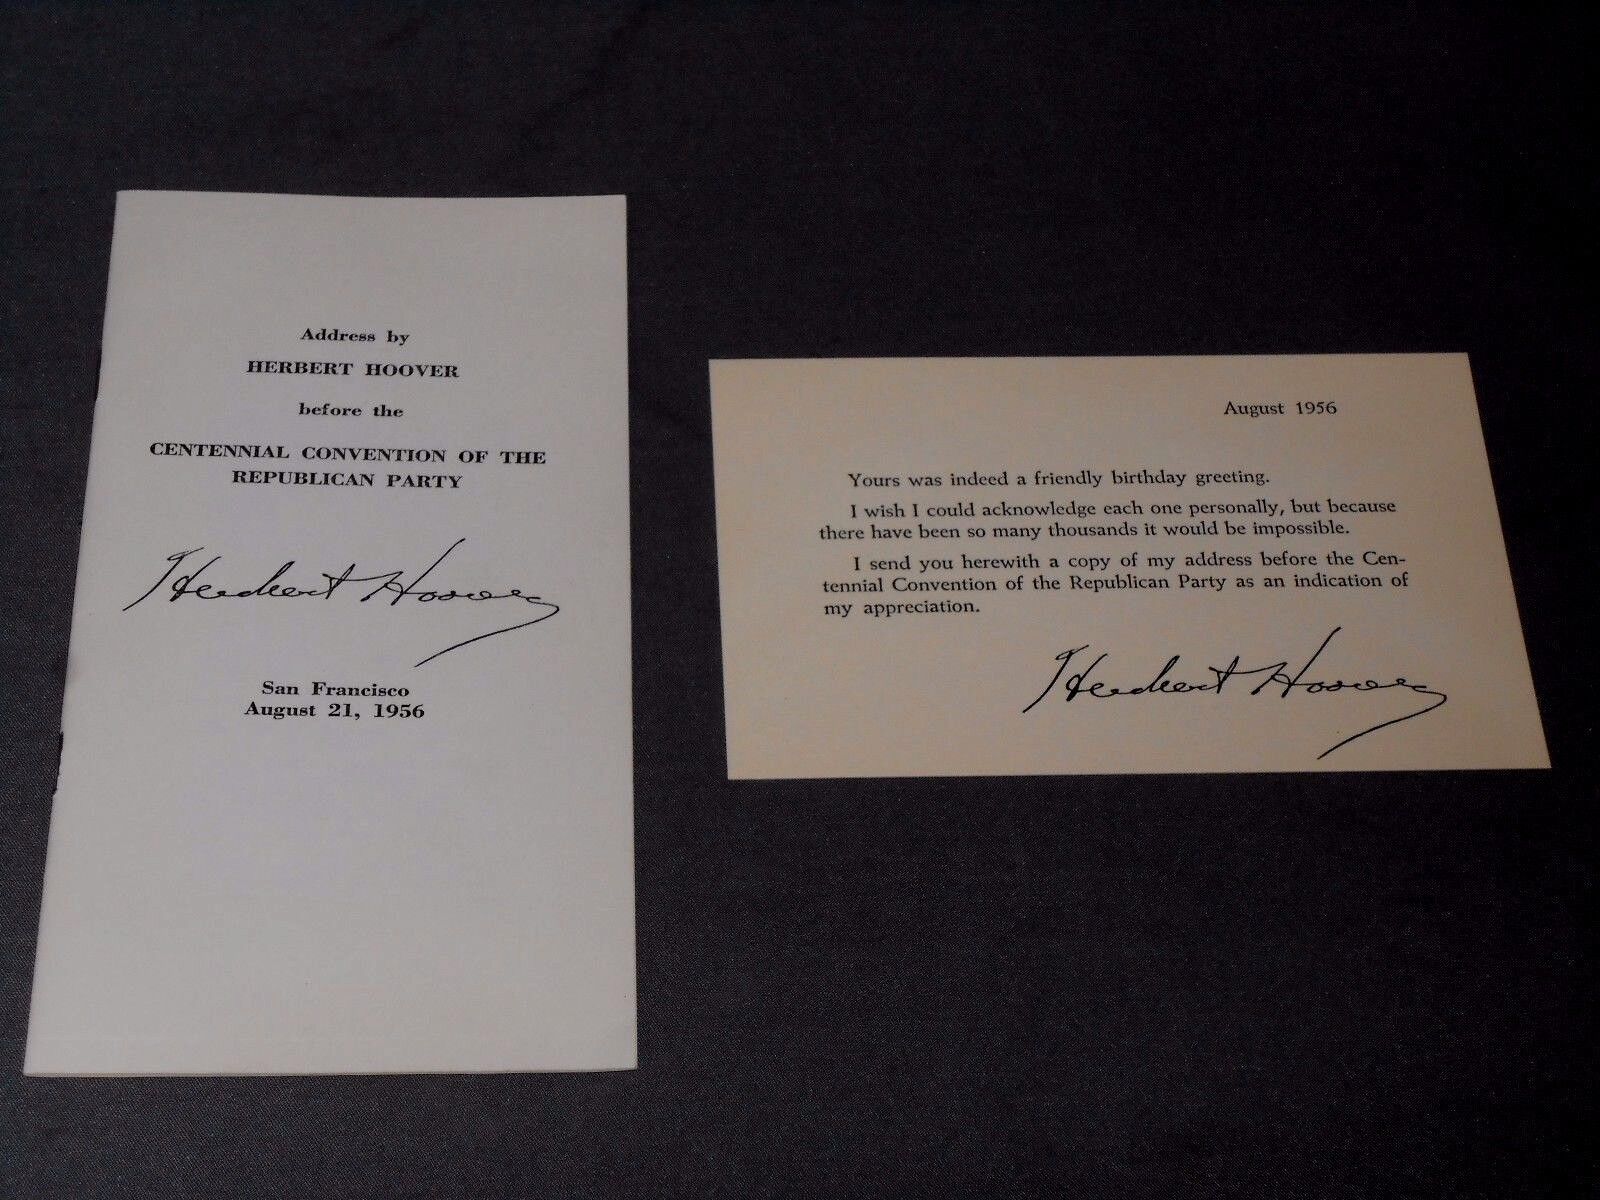 Vintage Herbert Hoover Centennial Convention To Republician Party Address 1956